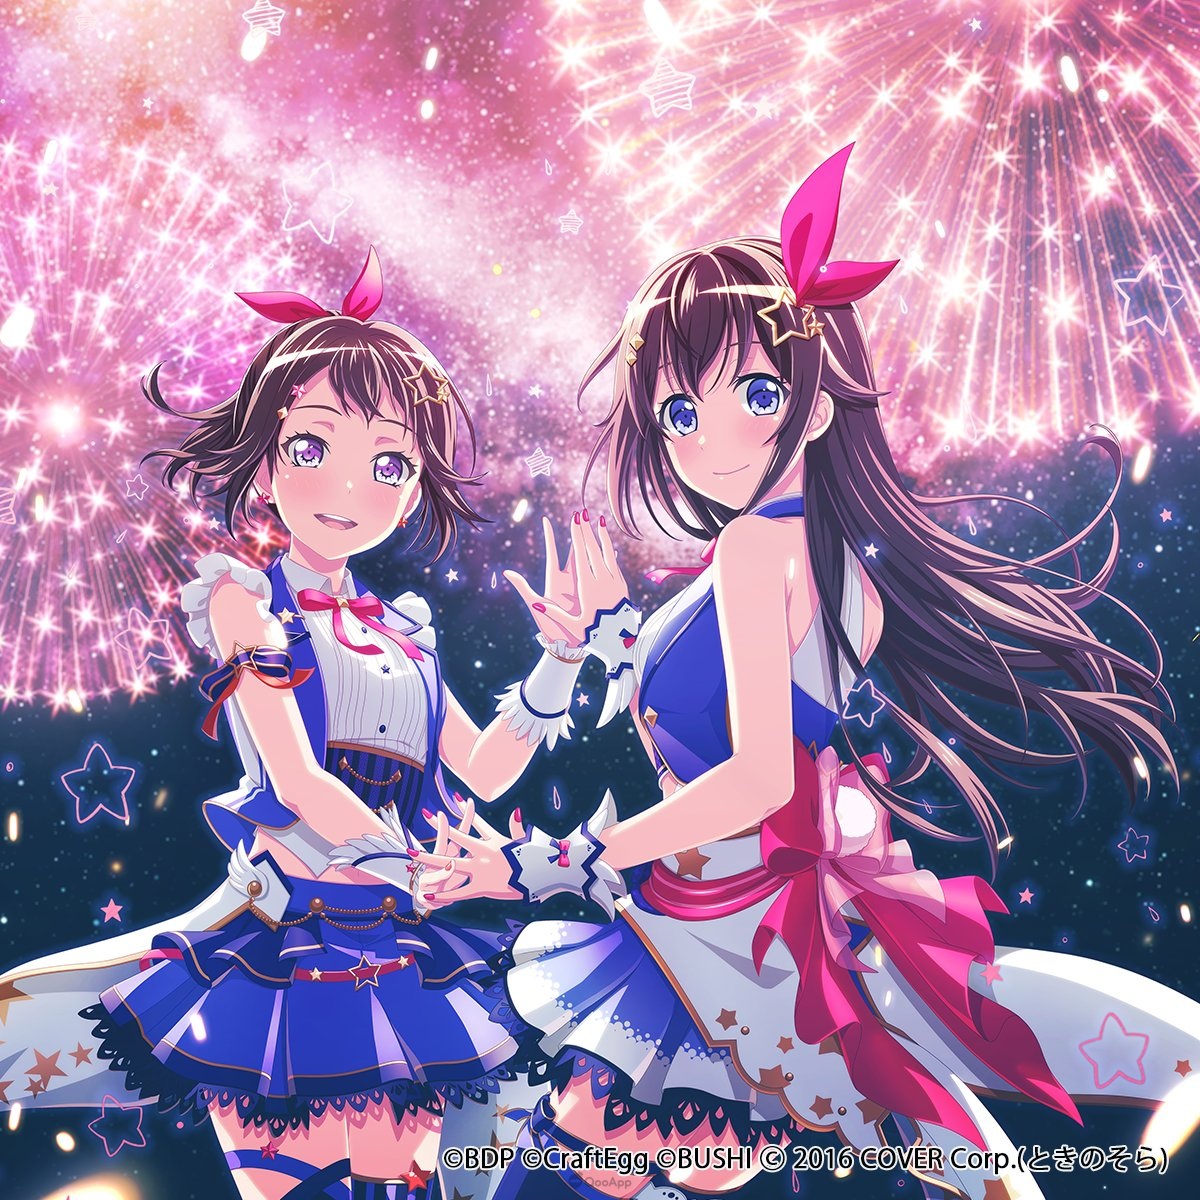 BanG Dream! GBP x hololive Collaboration Starts 22nd Oct